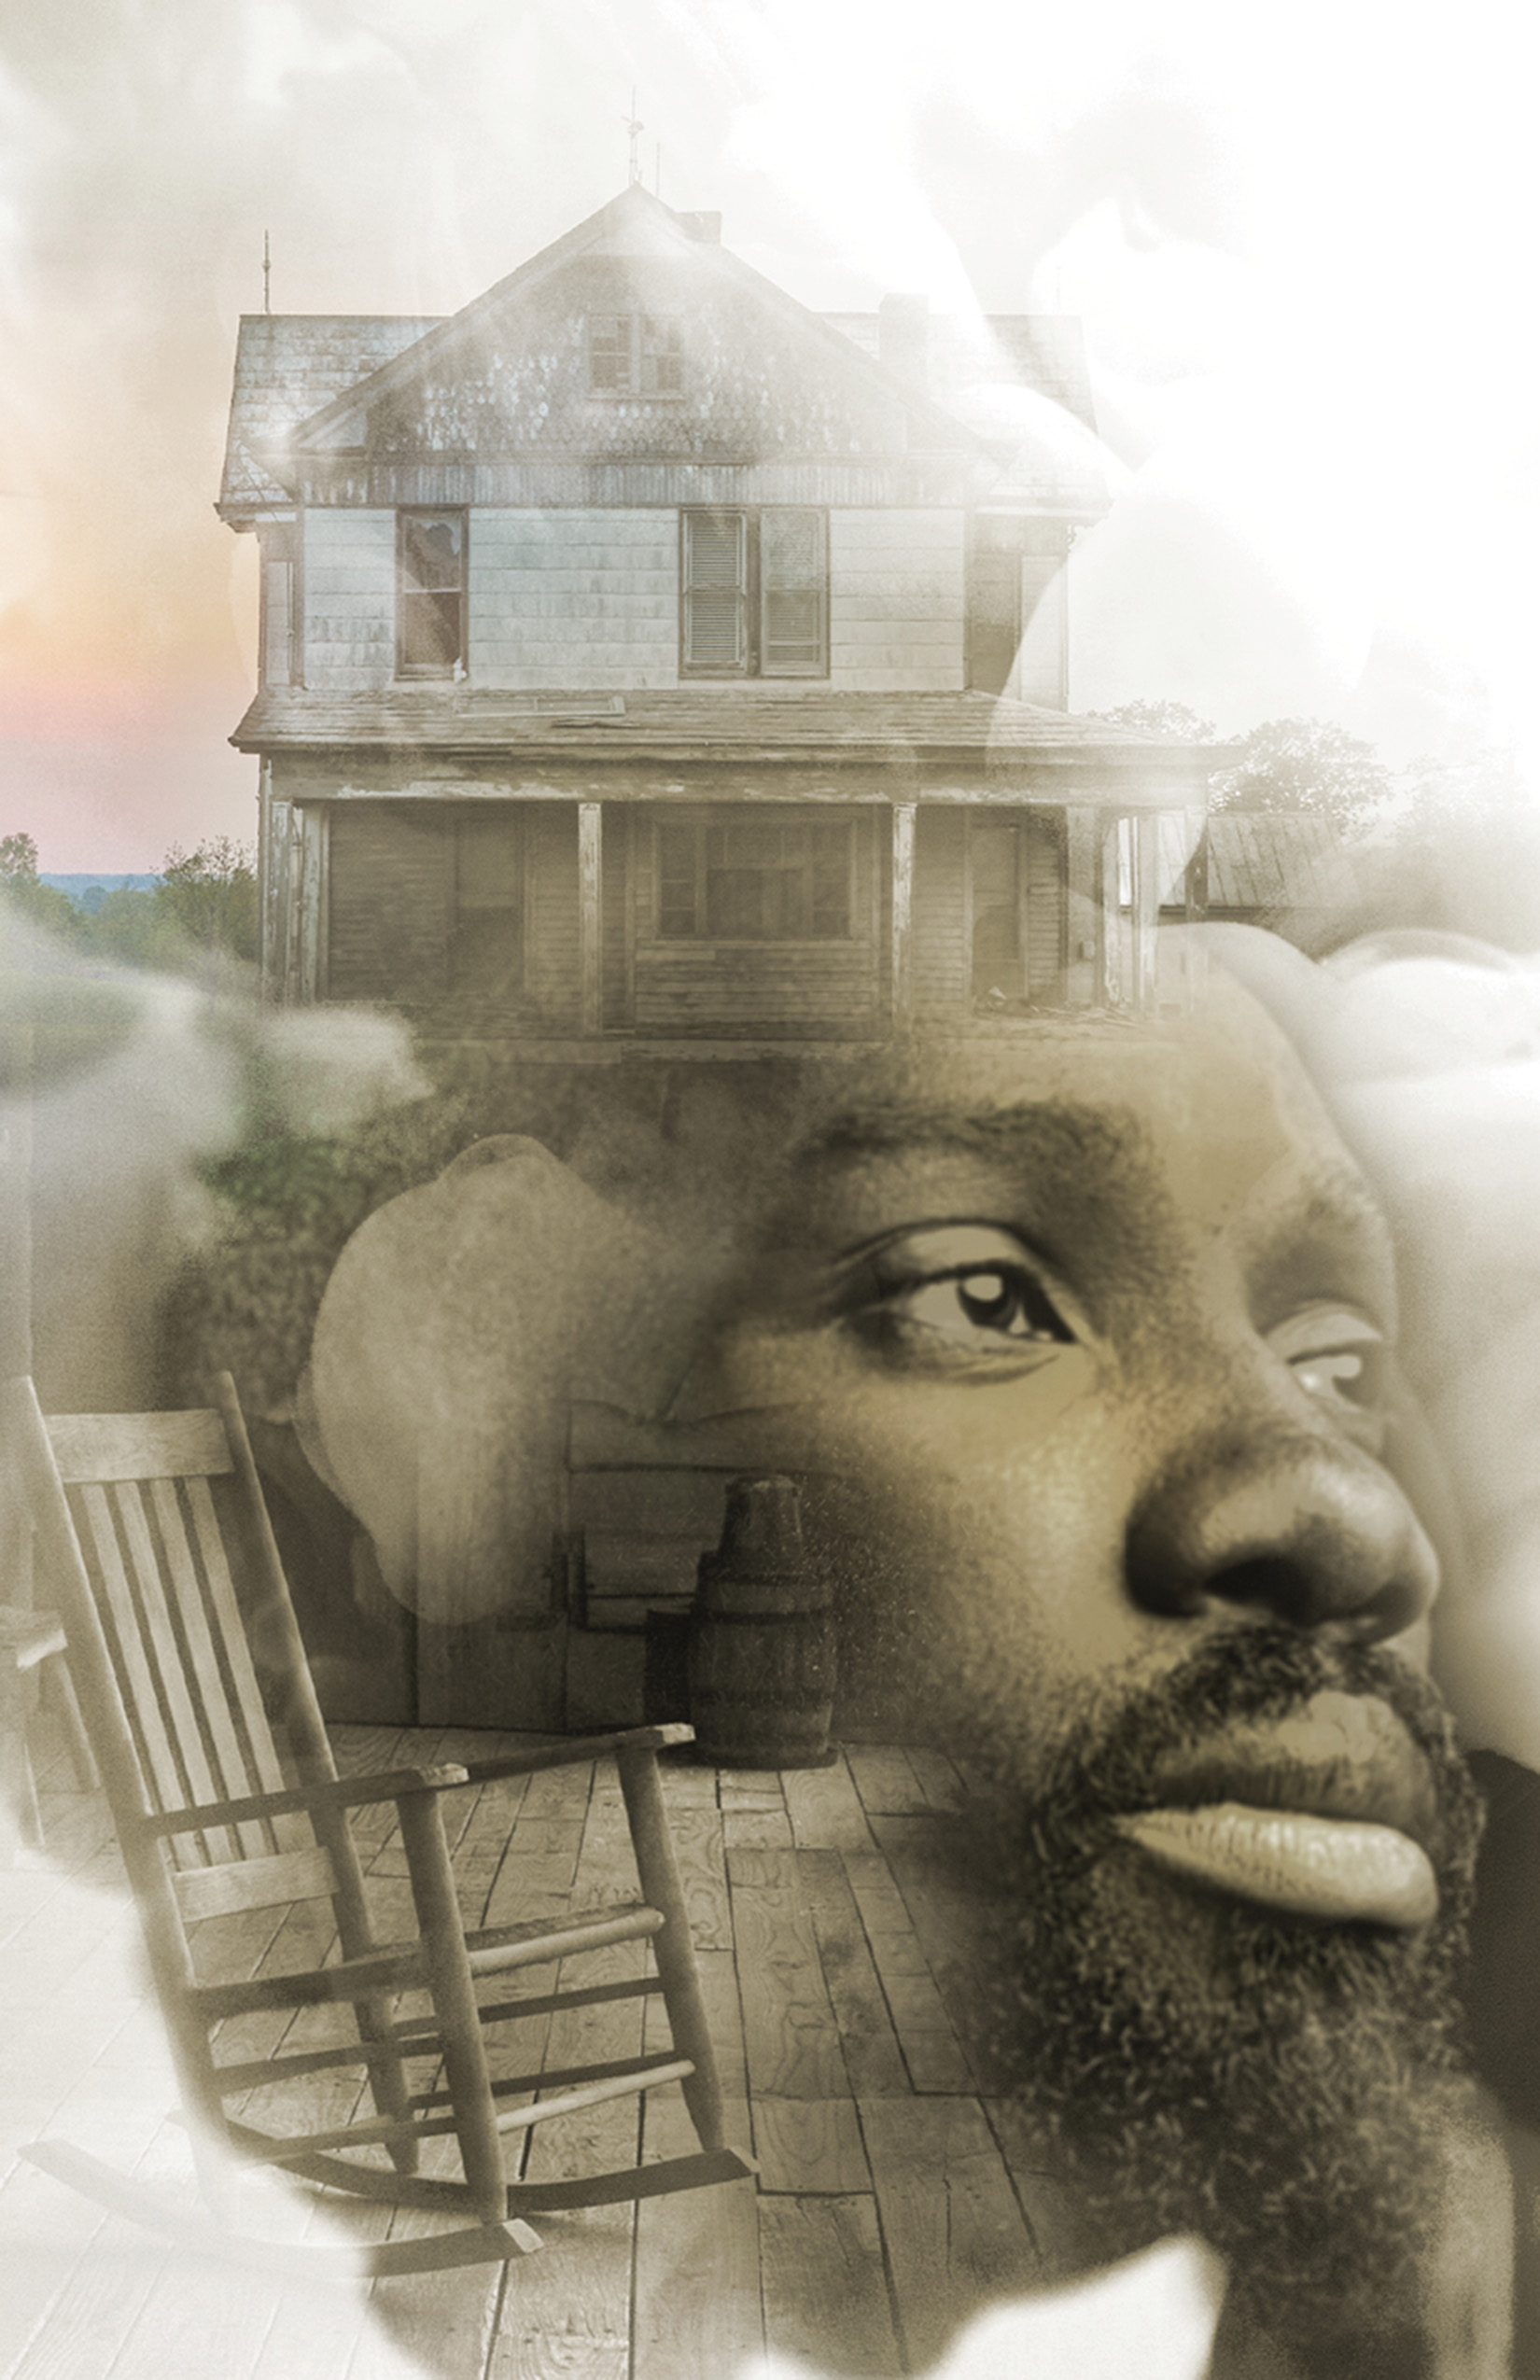 The Nebraska Rep presents virtual streaming performances of the St. Louis Black Rep's production of "Home" April 7-11.